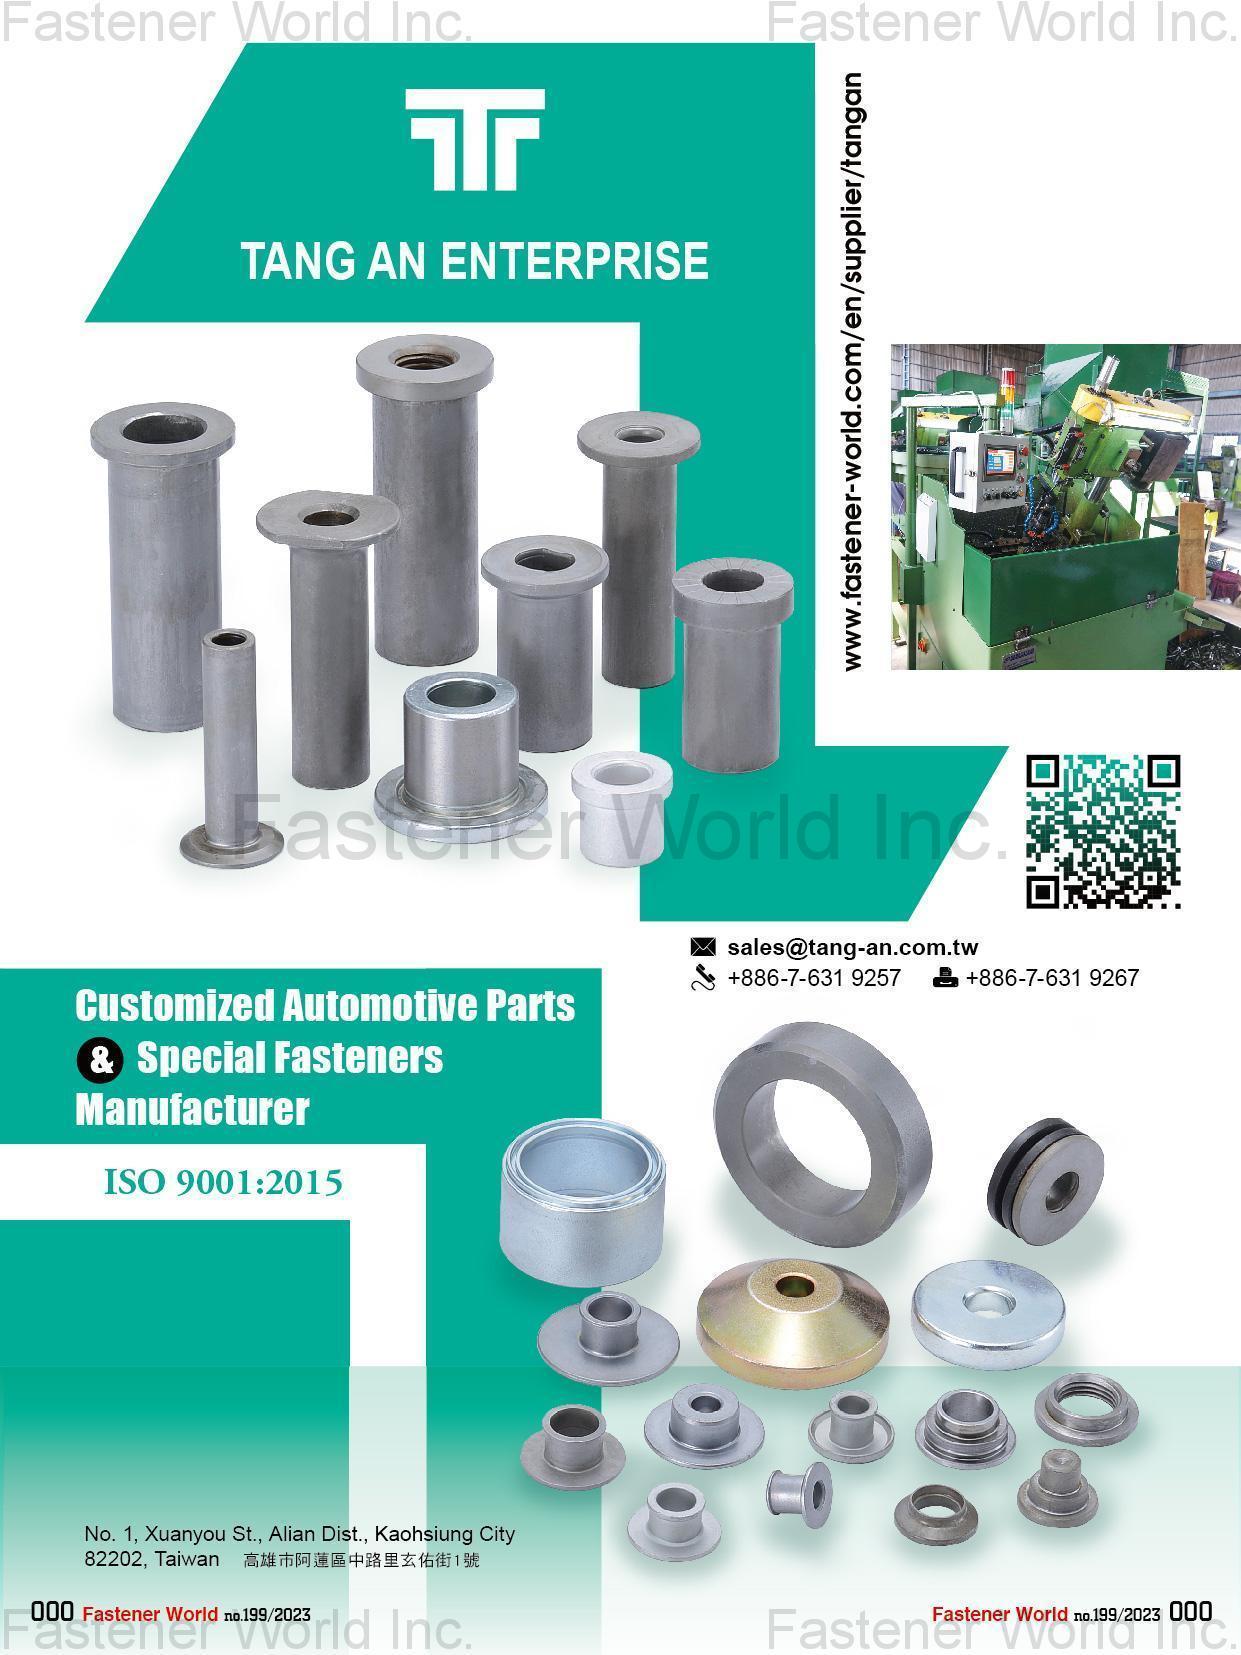 TANG AN ENTERPRISE CO., LTD. , Flange nut,Bushing,Tube,Spacer,Weld nut,T-nut,Pins,Special nuts,washers,Customized Automotive Parts,Special Fasteners 